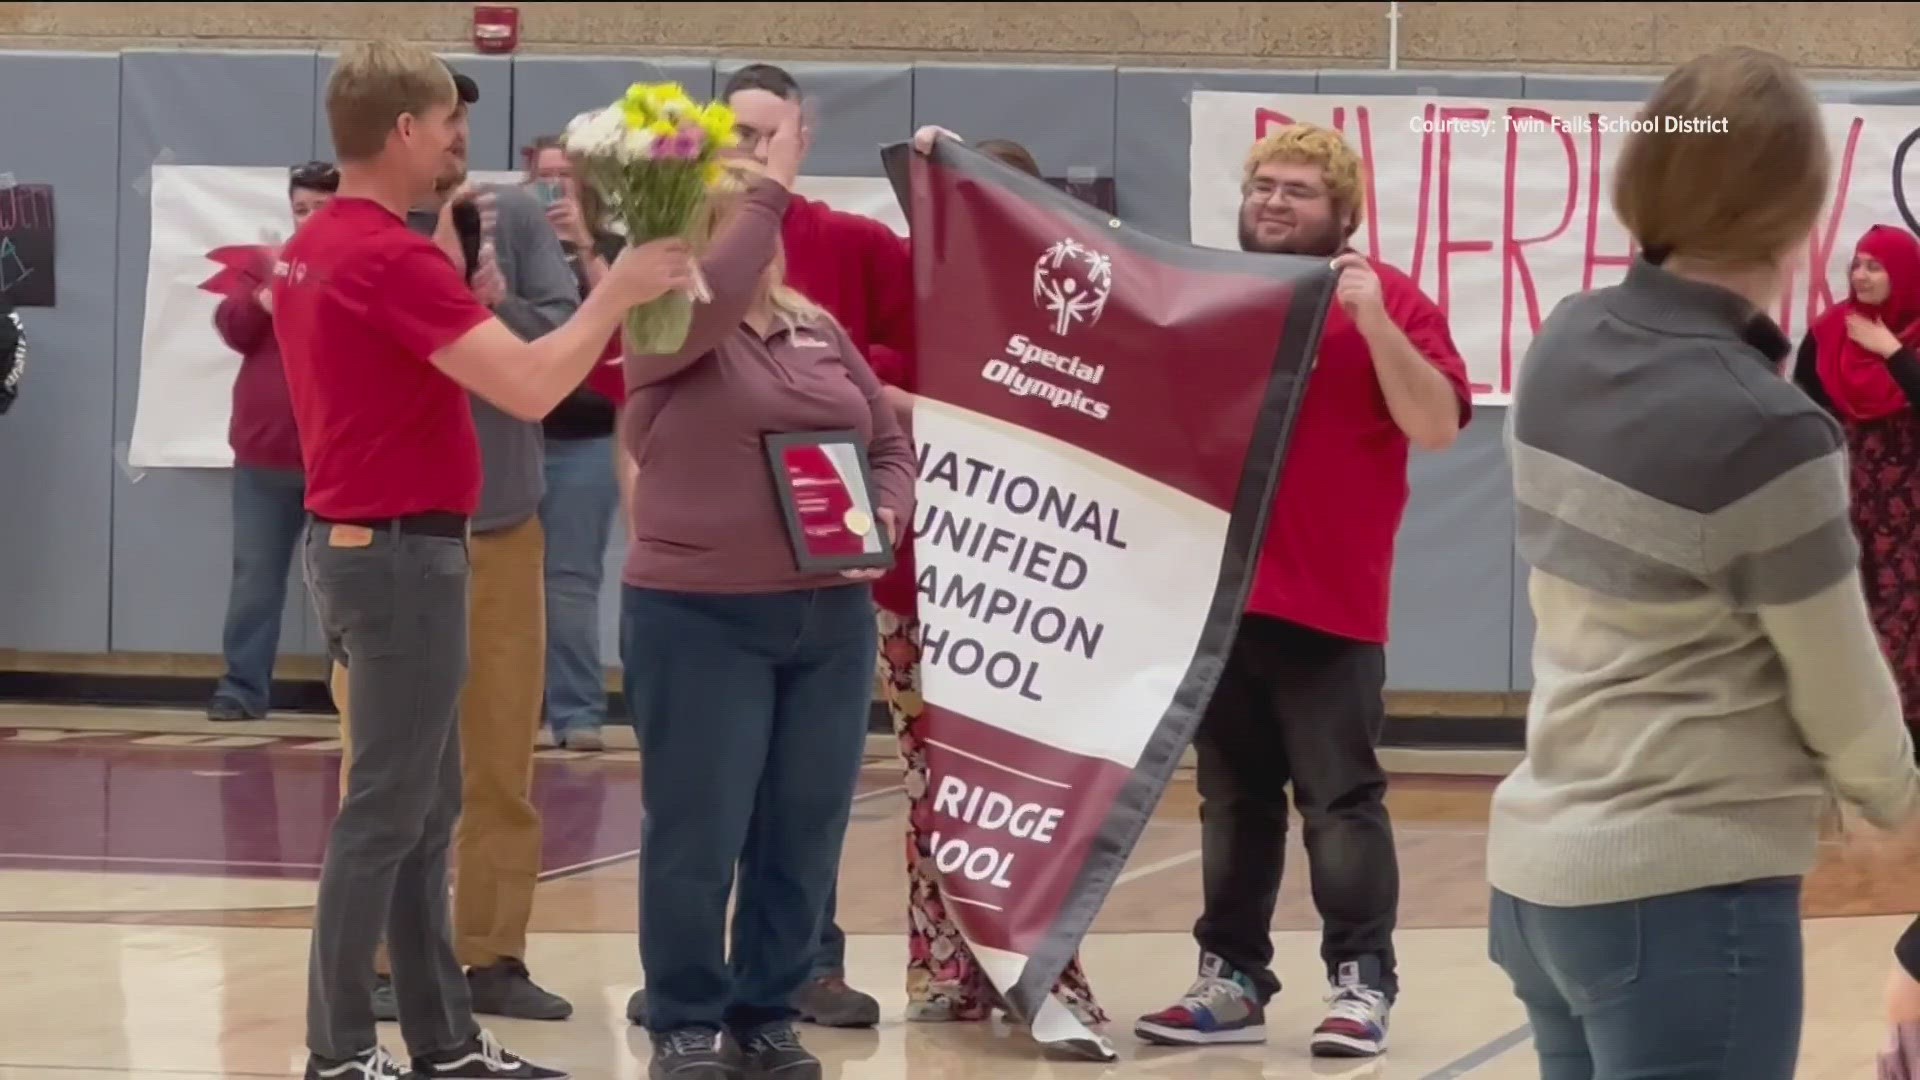 Canyon Ridge High School received an ESPN banner on Friday as a top-five school nationwide for promoting an inclusive environment in 2022.